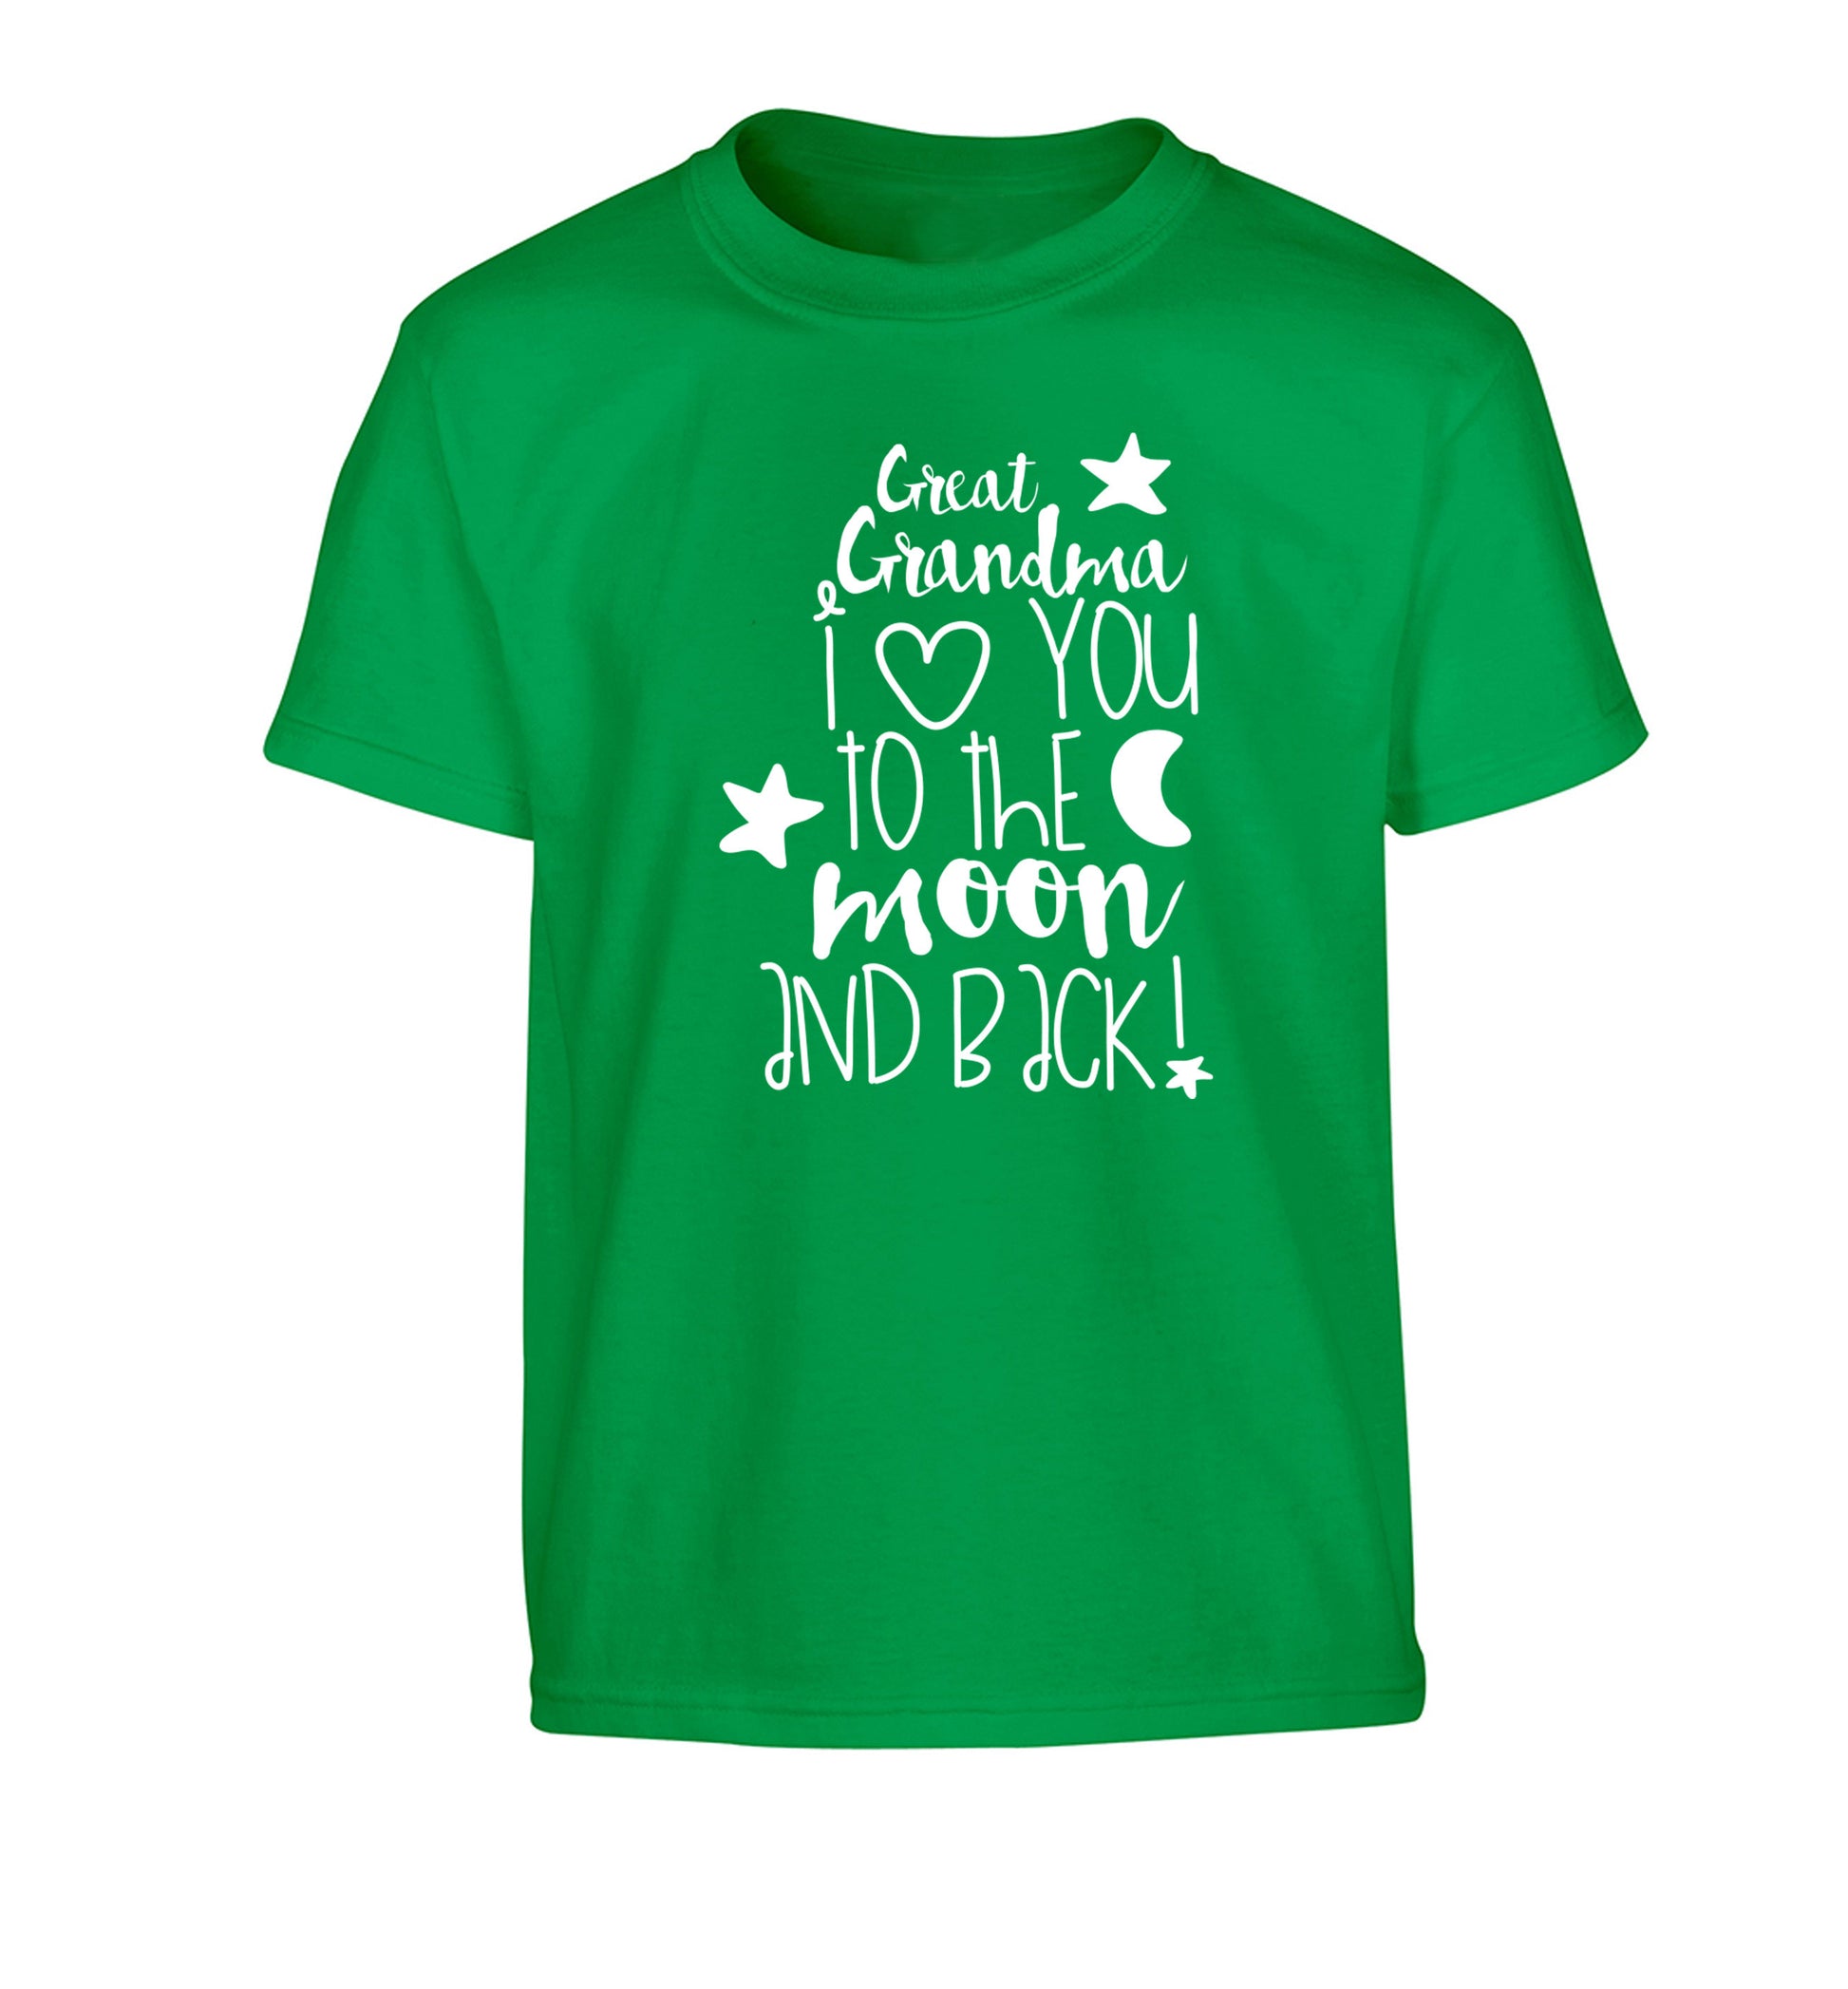 Great Grandma I love you to the moon and back Children's green Tshirt 12-14 Years